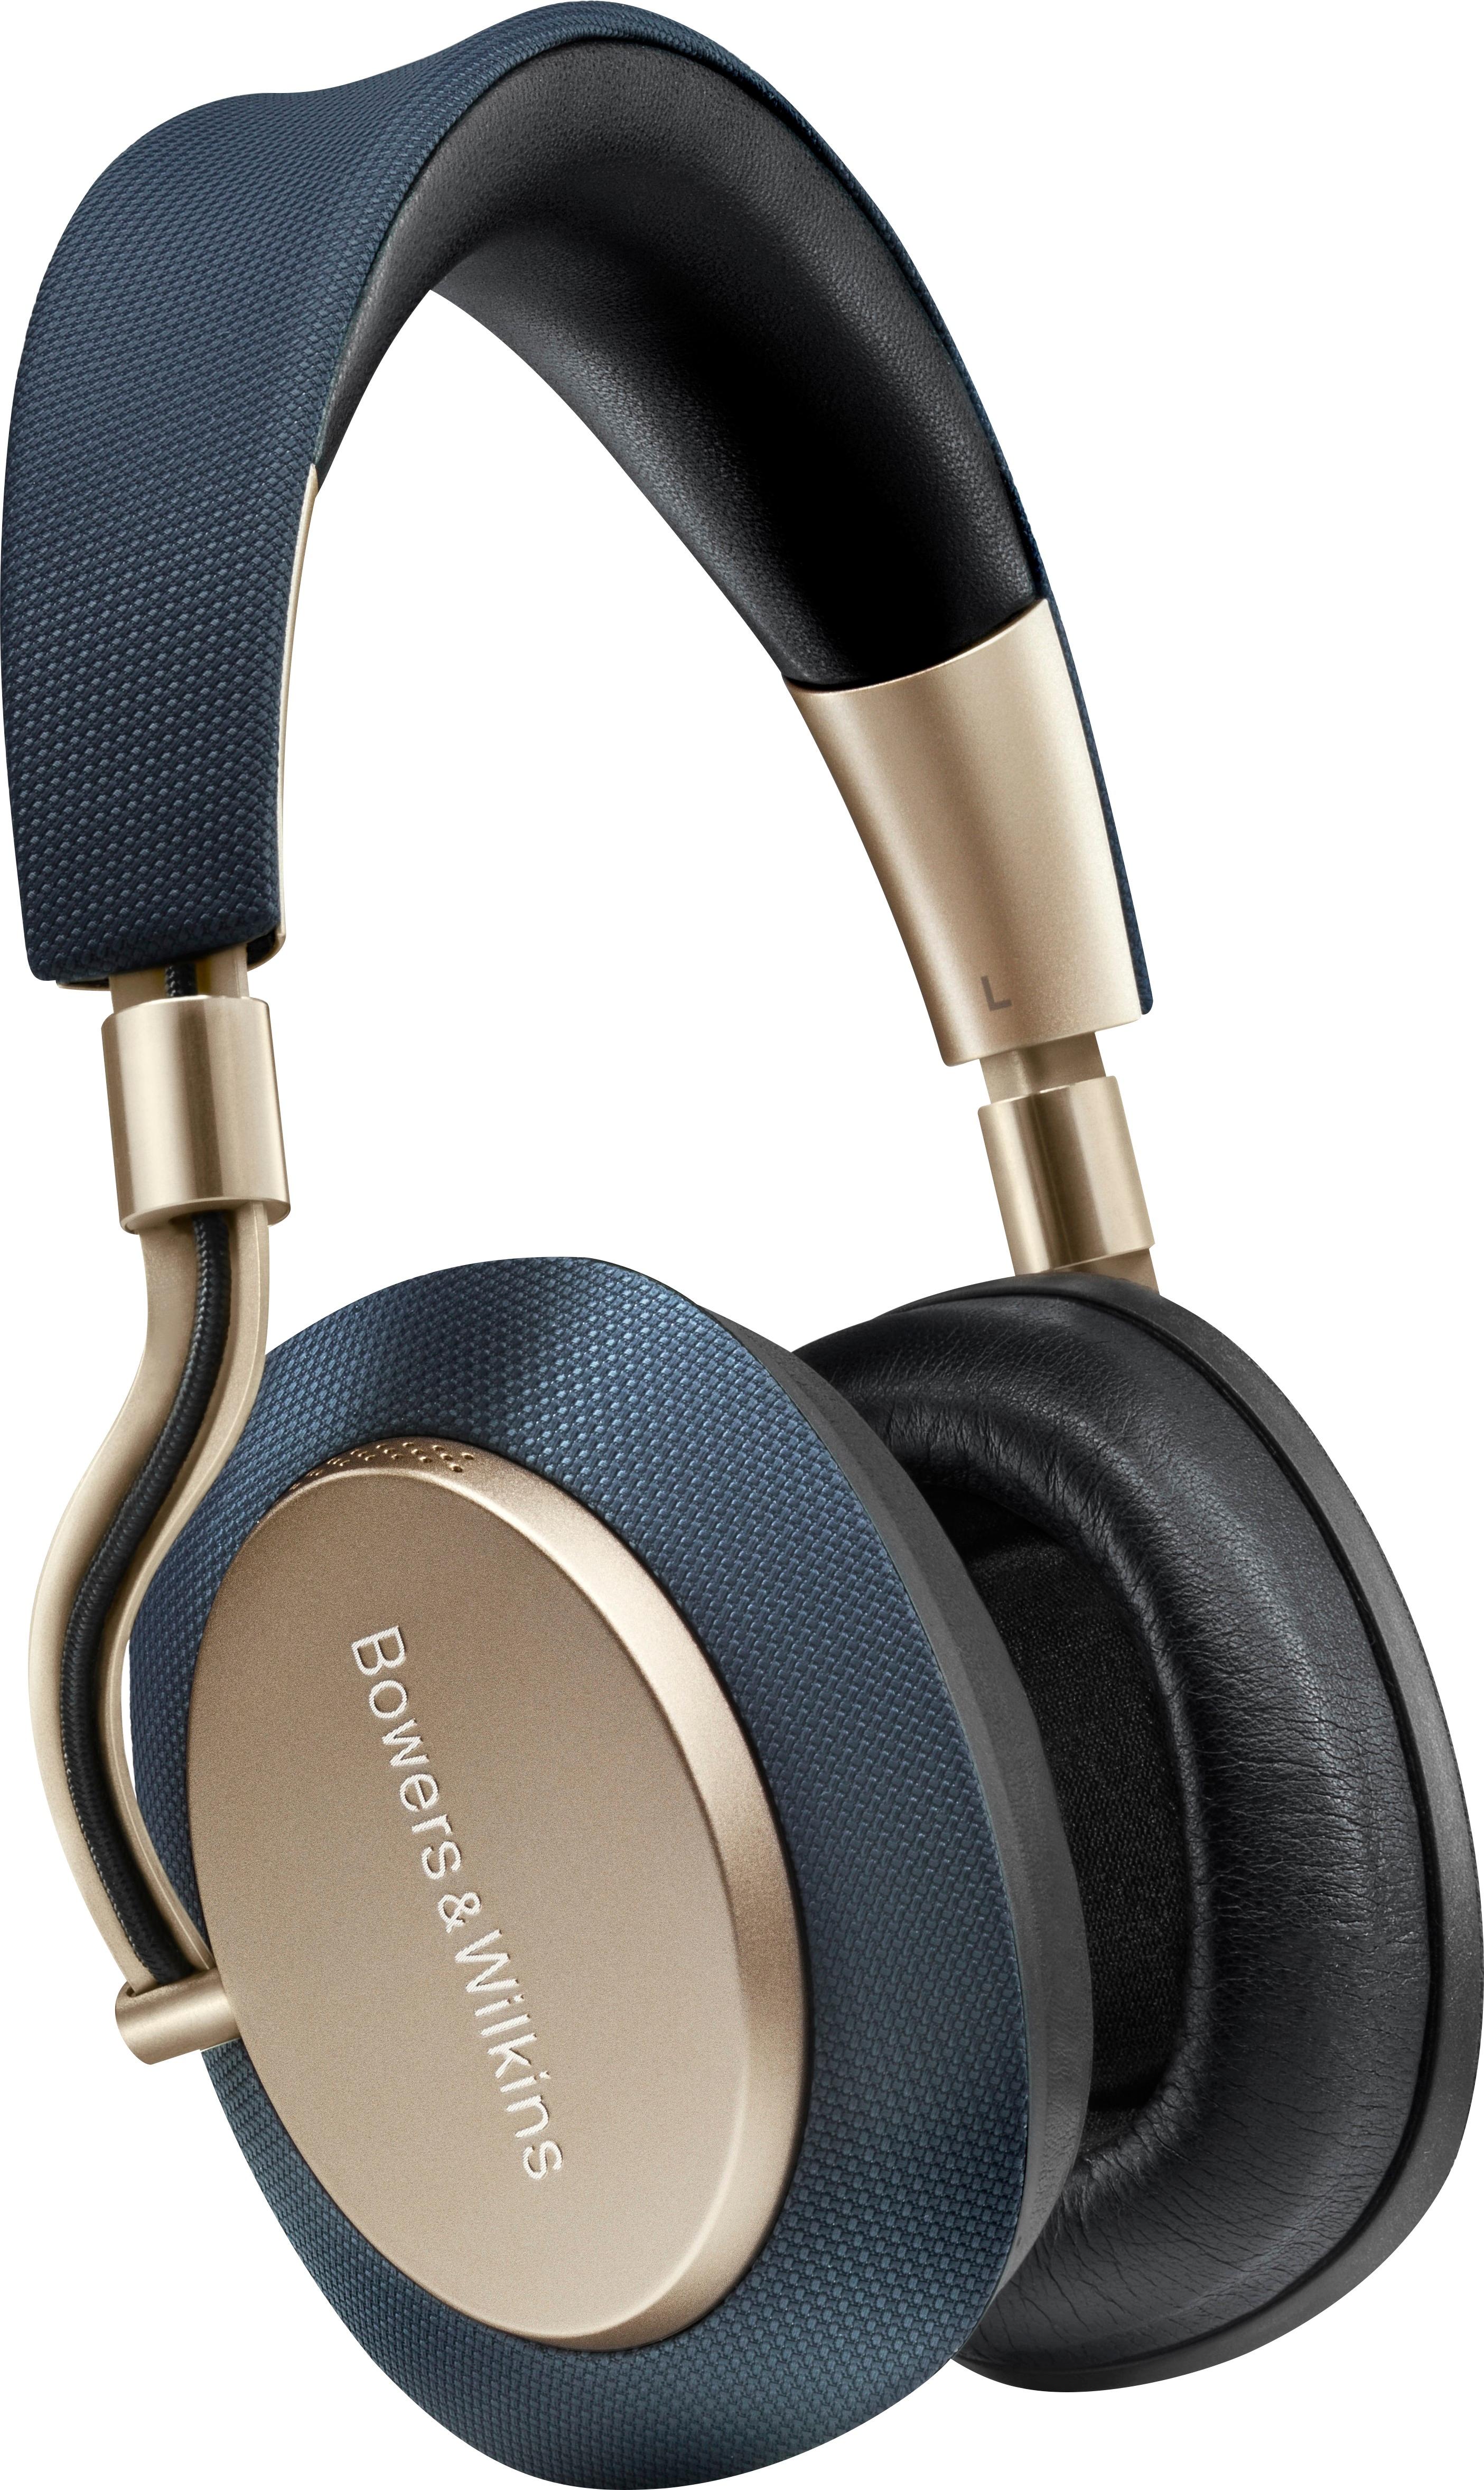 UPC 714346328949 product image for Bowers & Wilkins - PX Wireless Noise Cancelling Over-the-Ear Headphones - Soft G | upcitemdb.com